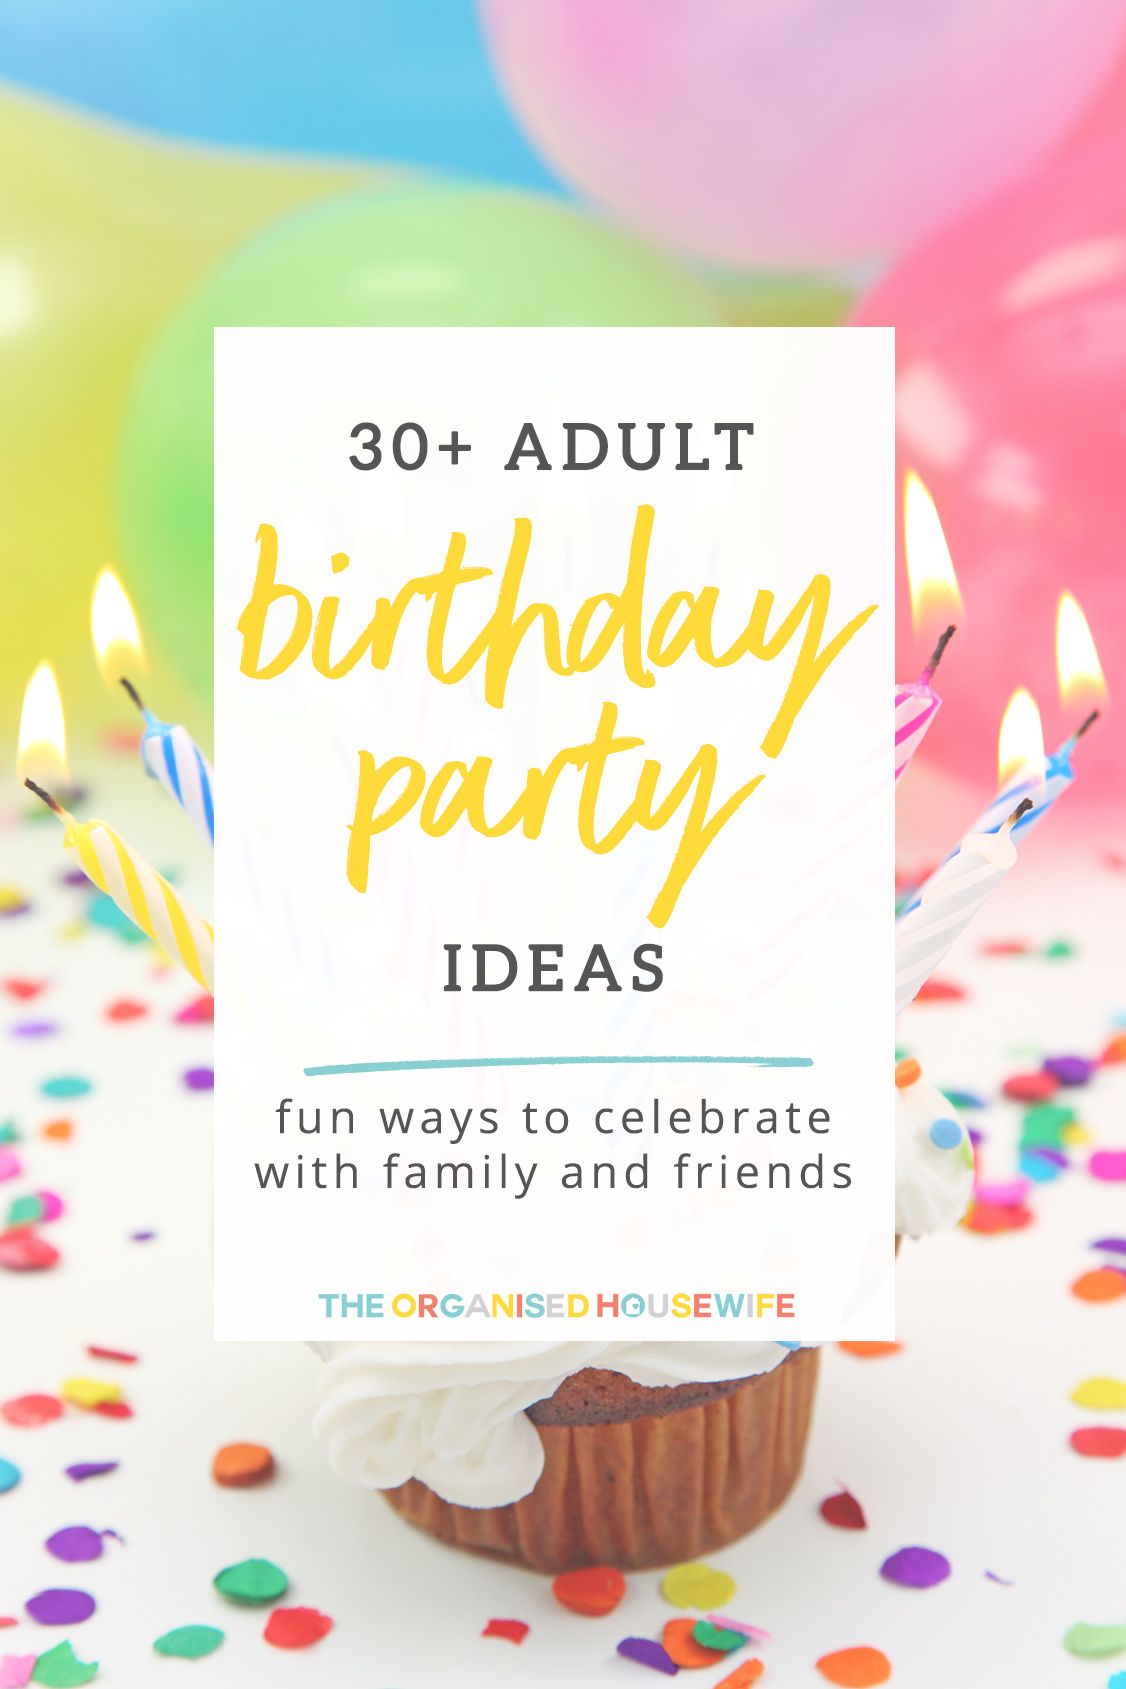 How To Celebrate Your 30th Birthday Alone